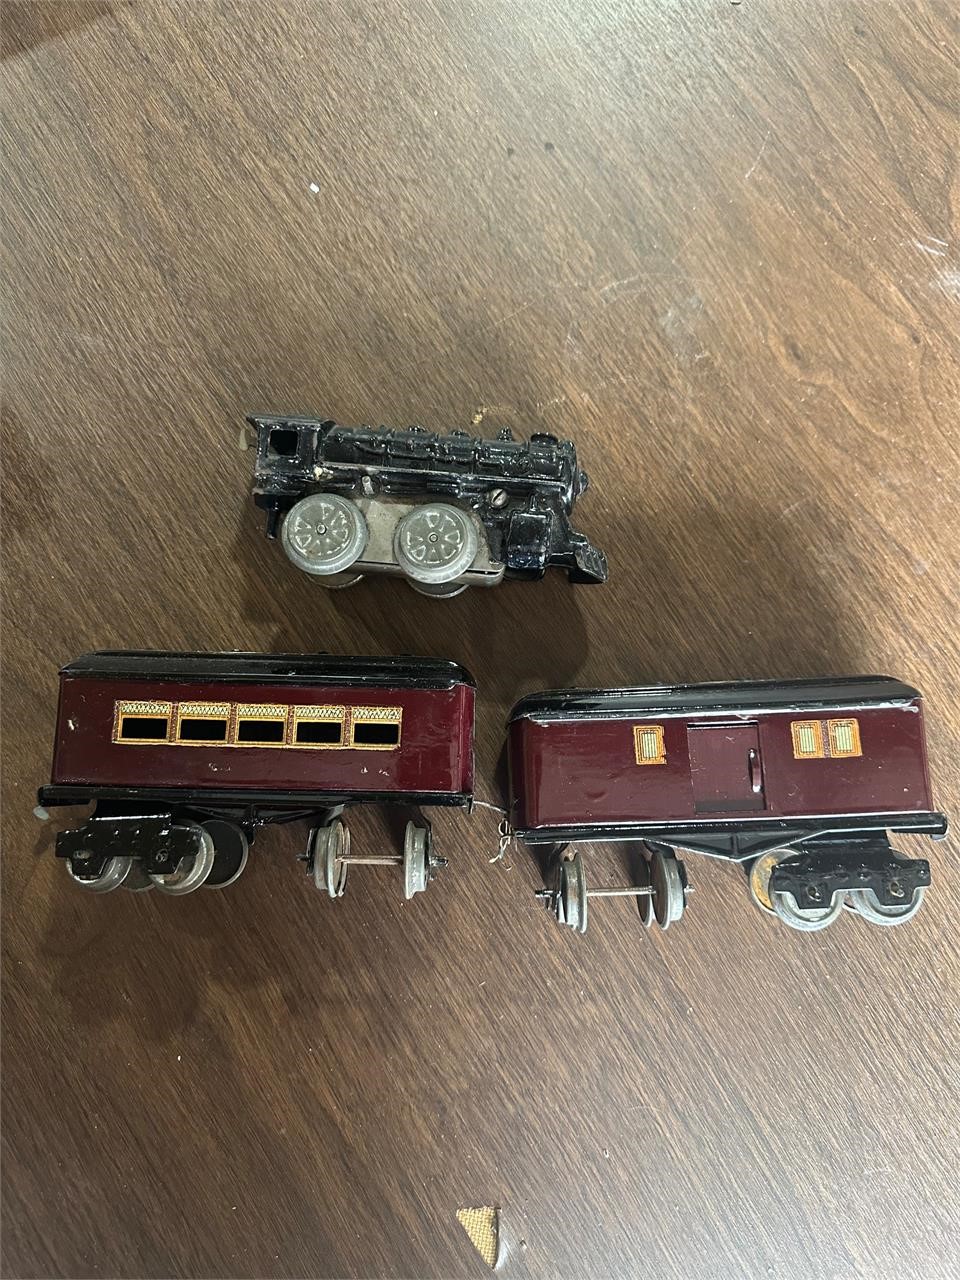 Vintage cast iron engine and tin cars